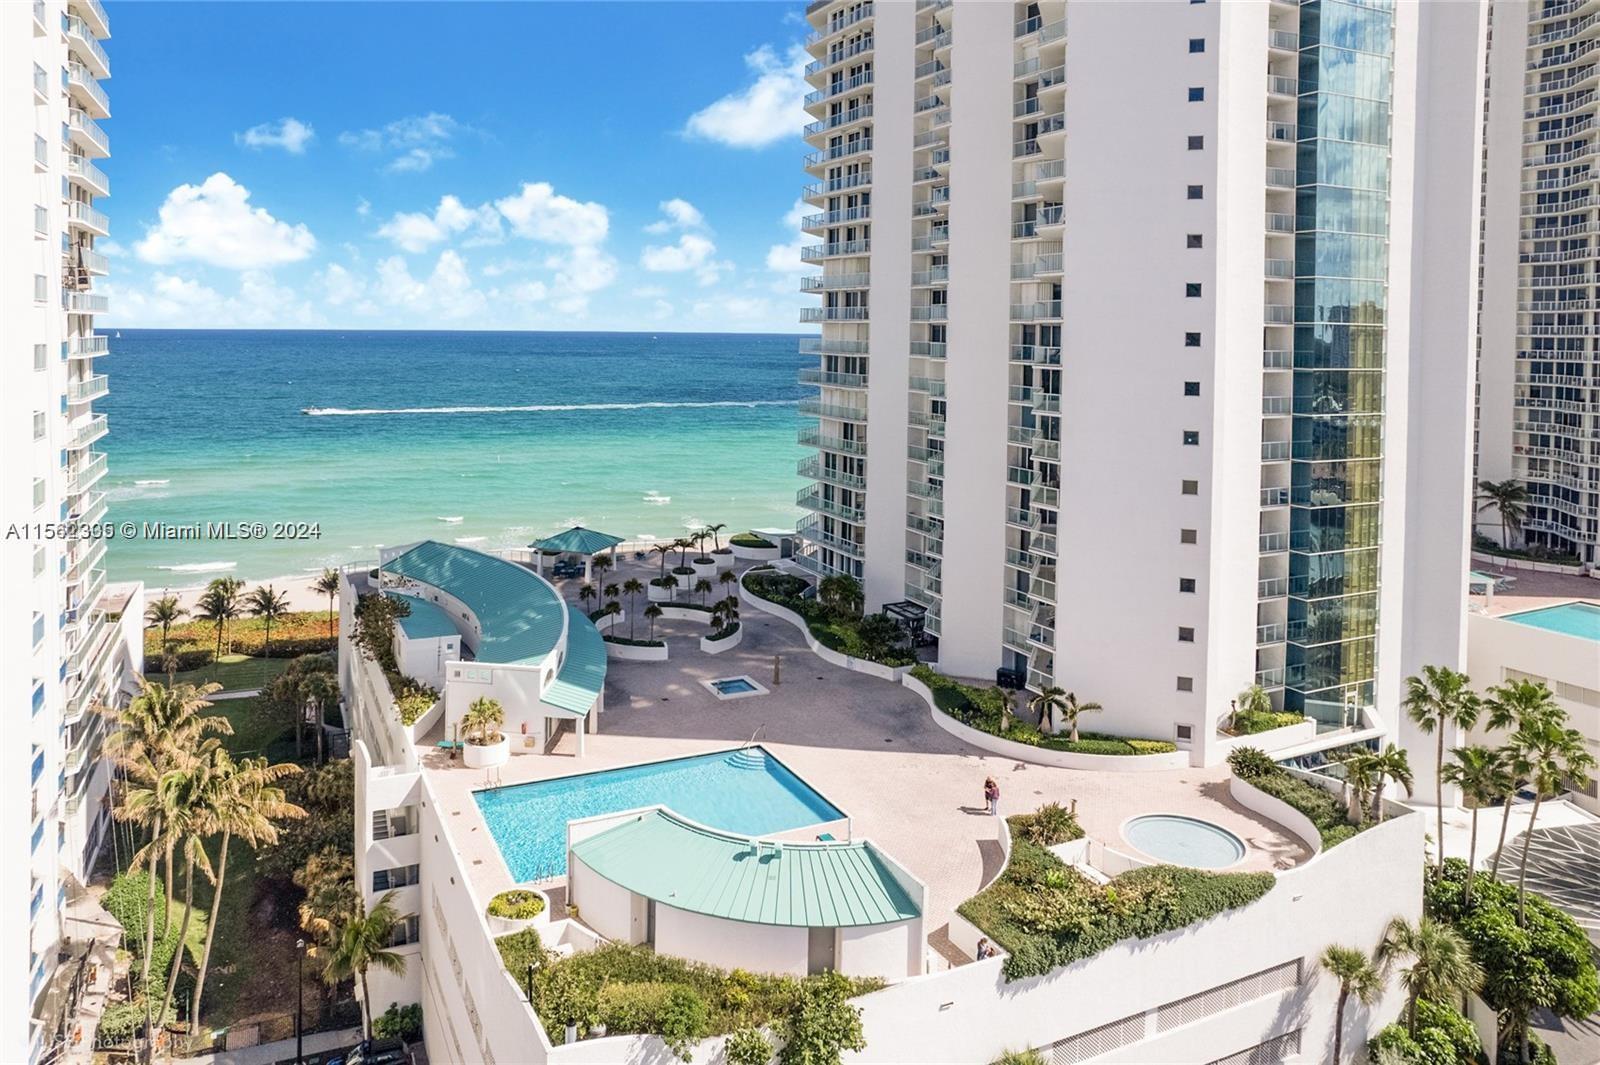 Photo of 16445 Collins Ave #221 in Sunny Isles Beach, FL